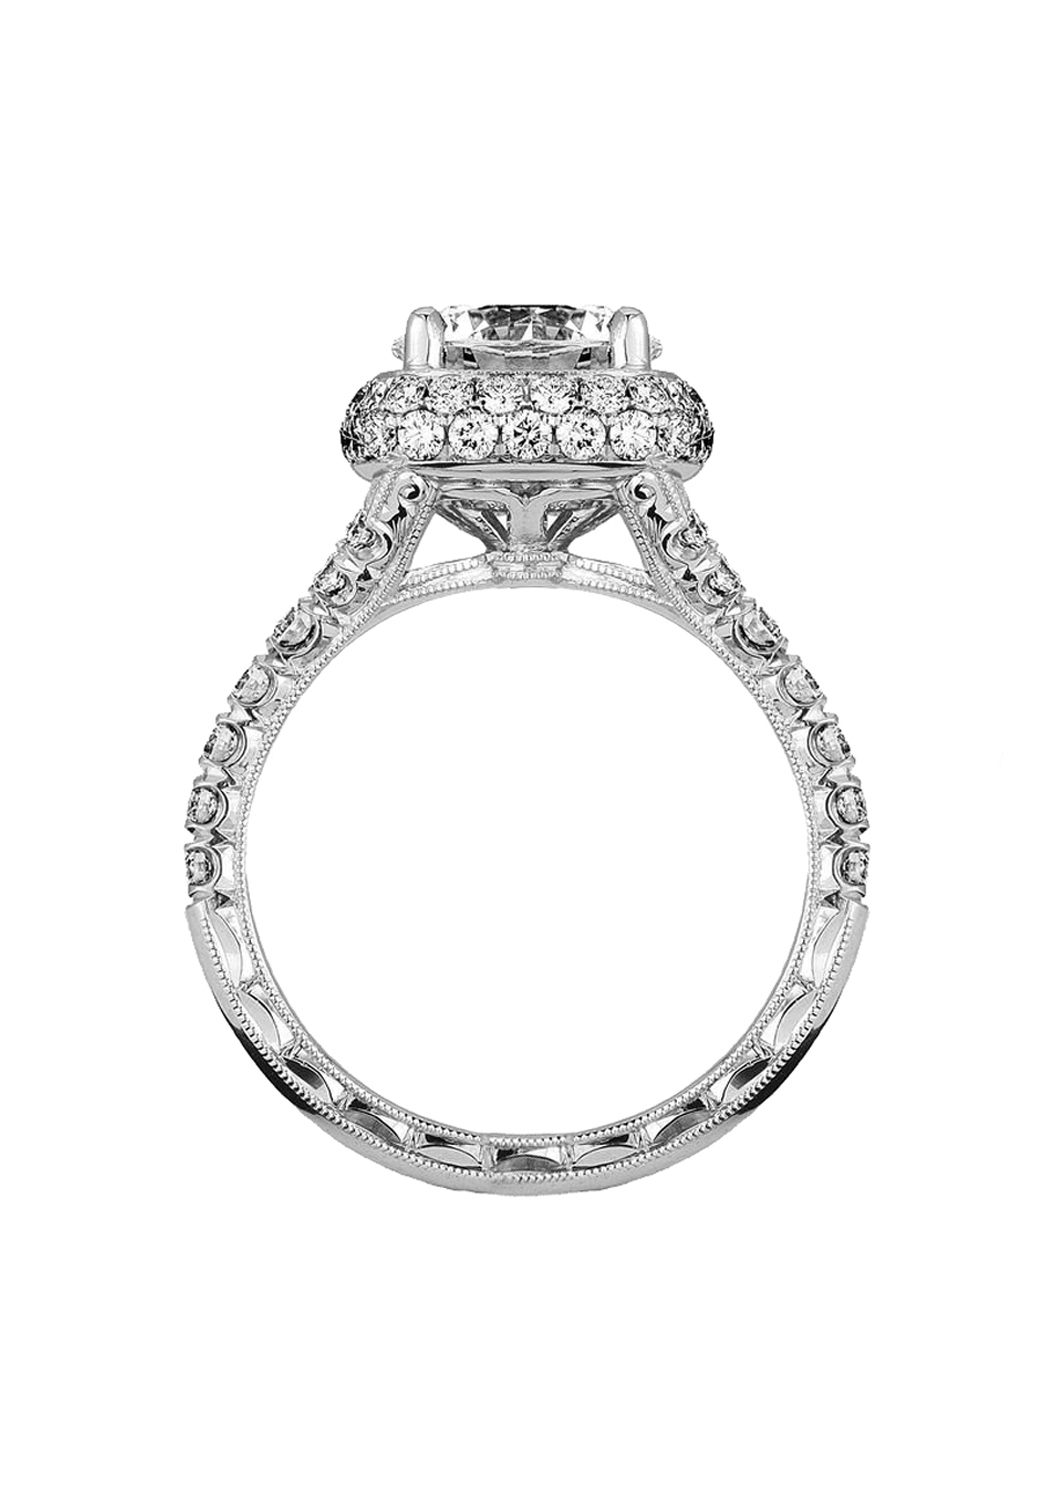 Diamond Solitaire Engagement Ring - KGR1246 – Jack Kelége | Diamond  Engagement Rings, Wedding Rings, and Fine Jewelry